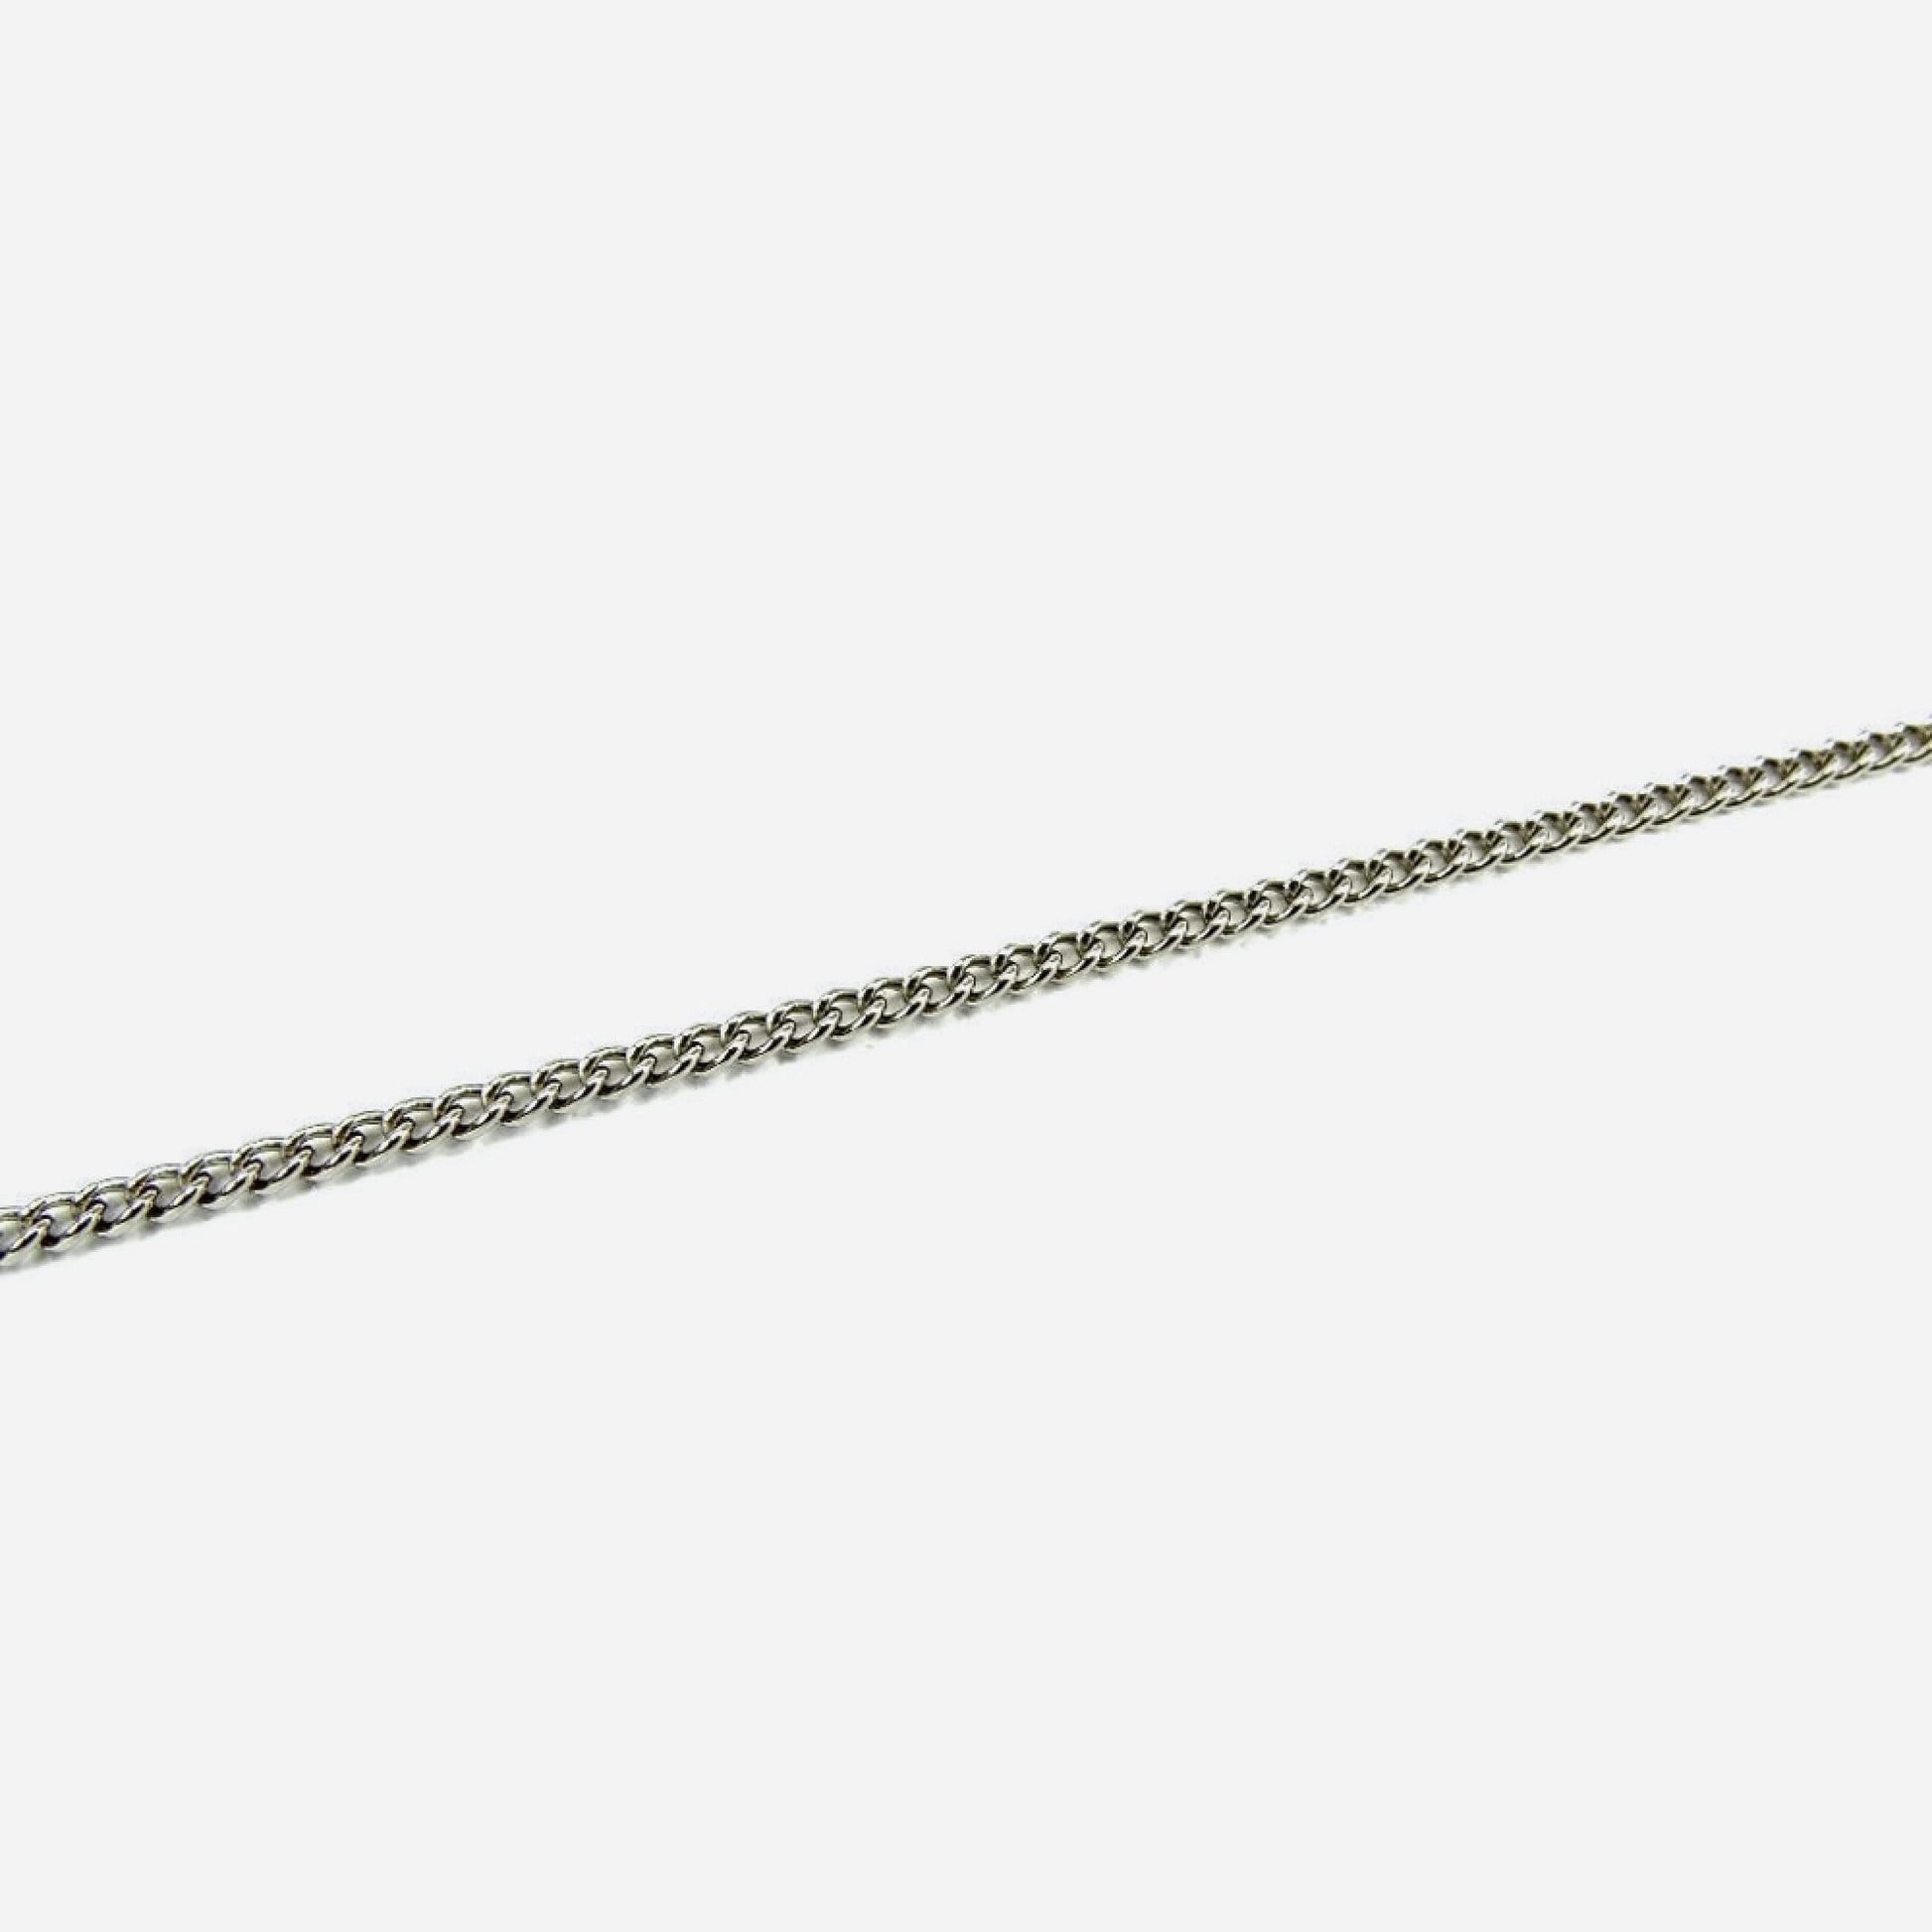 Titanium Necklace, Pure Titanium Chain Necklace for Sensitive Skin, Curb Chain, Hypoallergenic Nickel Free Necklace, Add Your Own Pendant